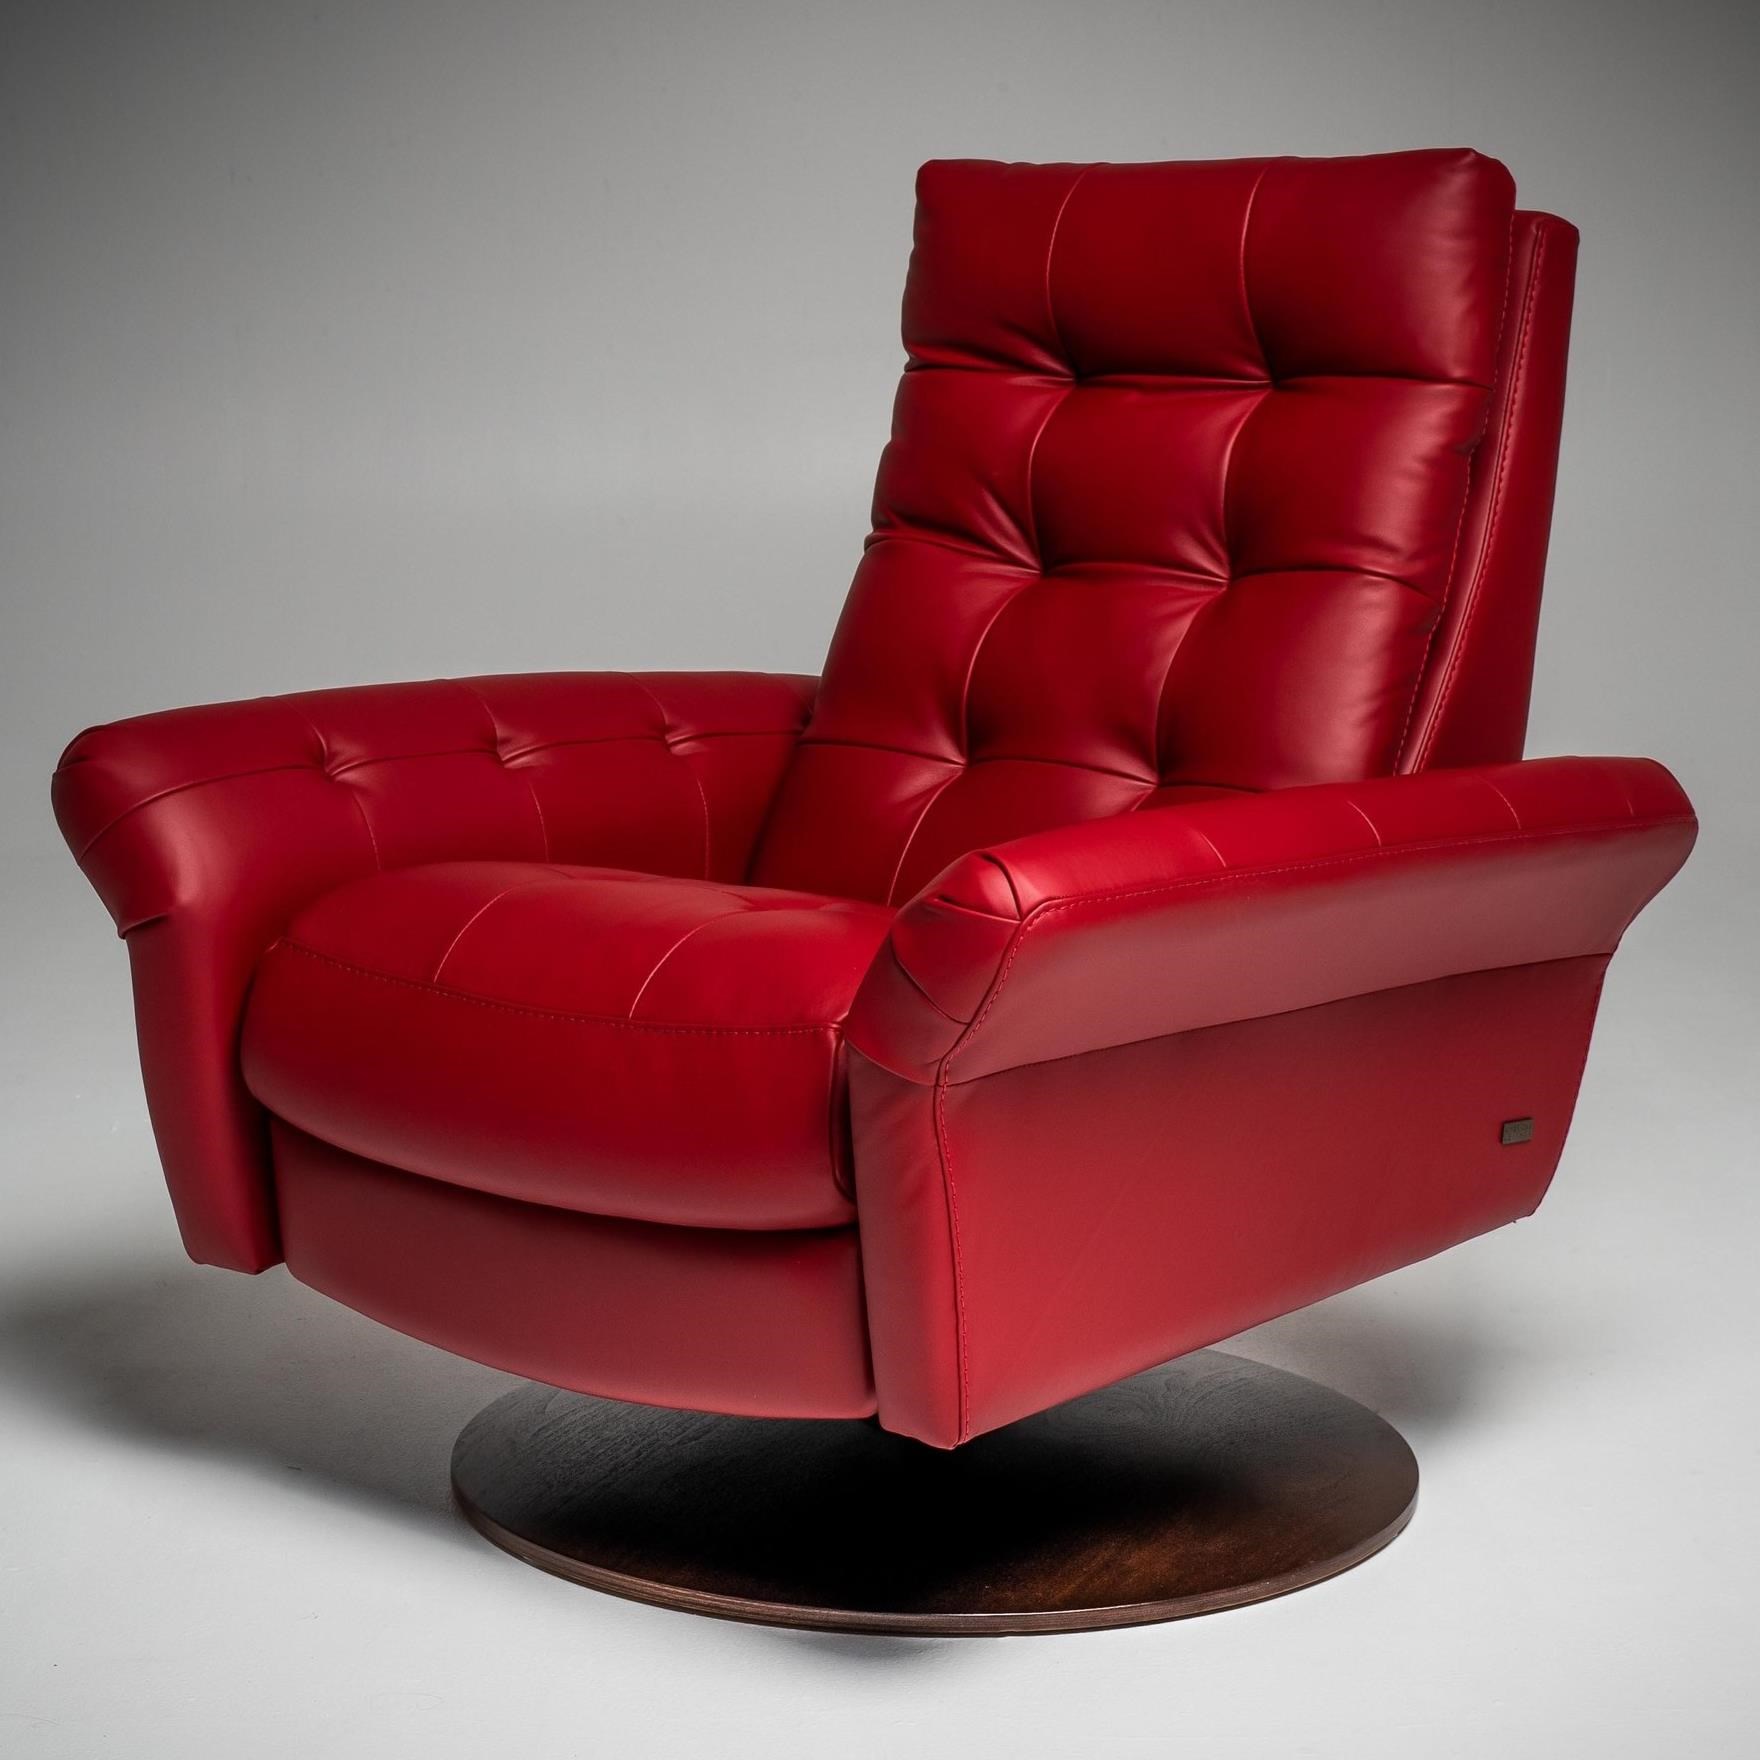 large glider chair